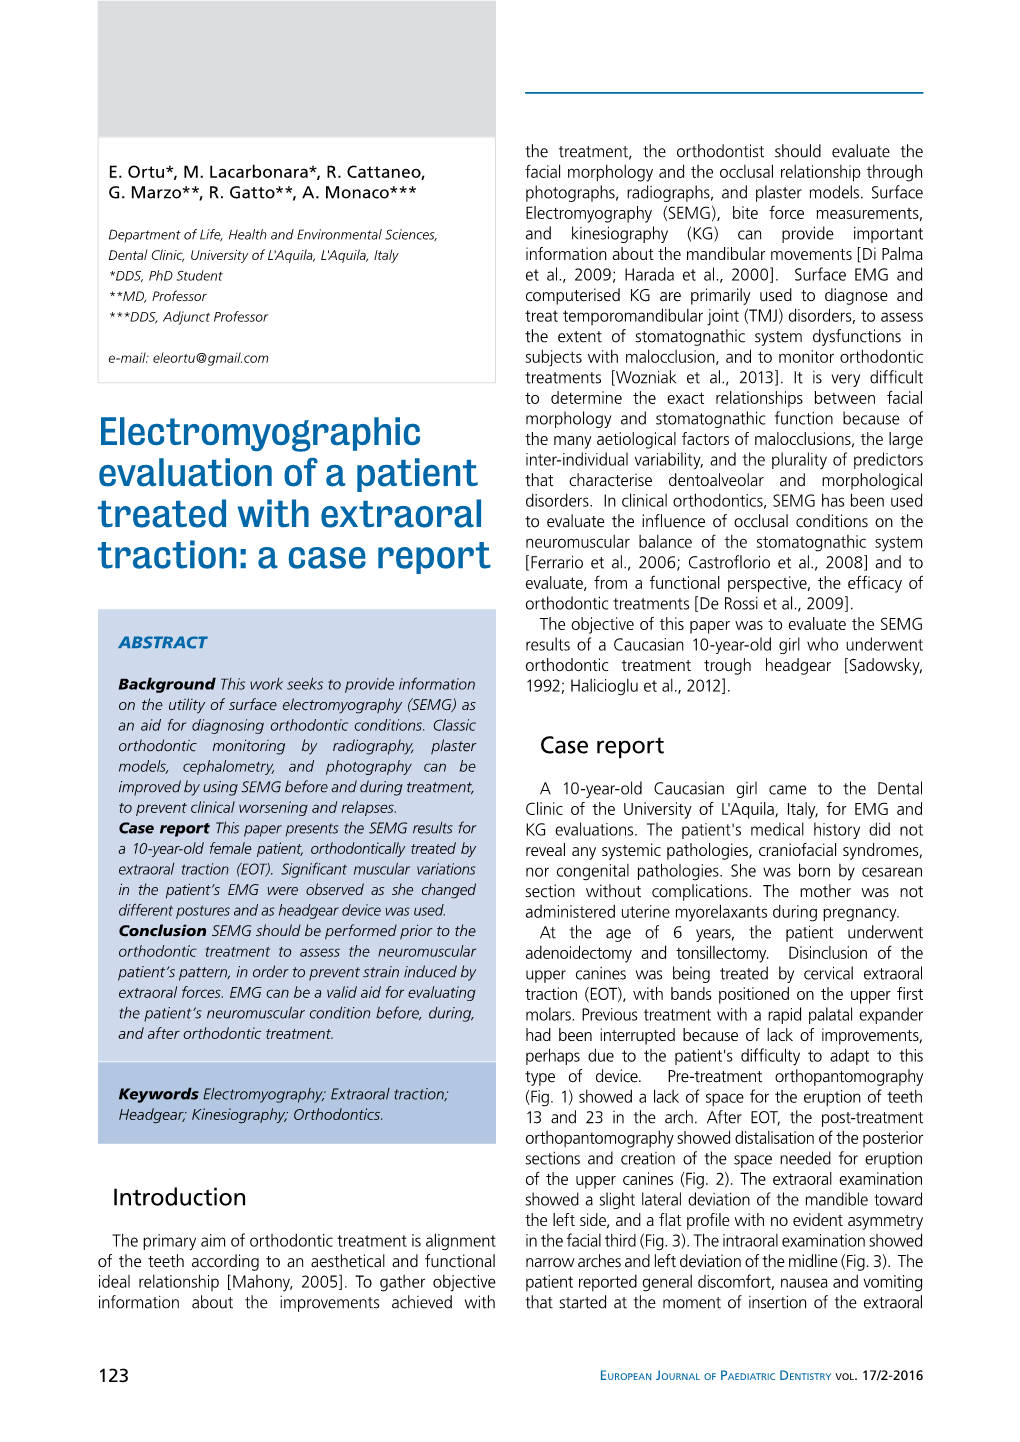 Electromyographic Evaluation of a Patient Treated with Extraoral Traction